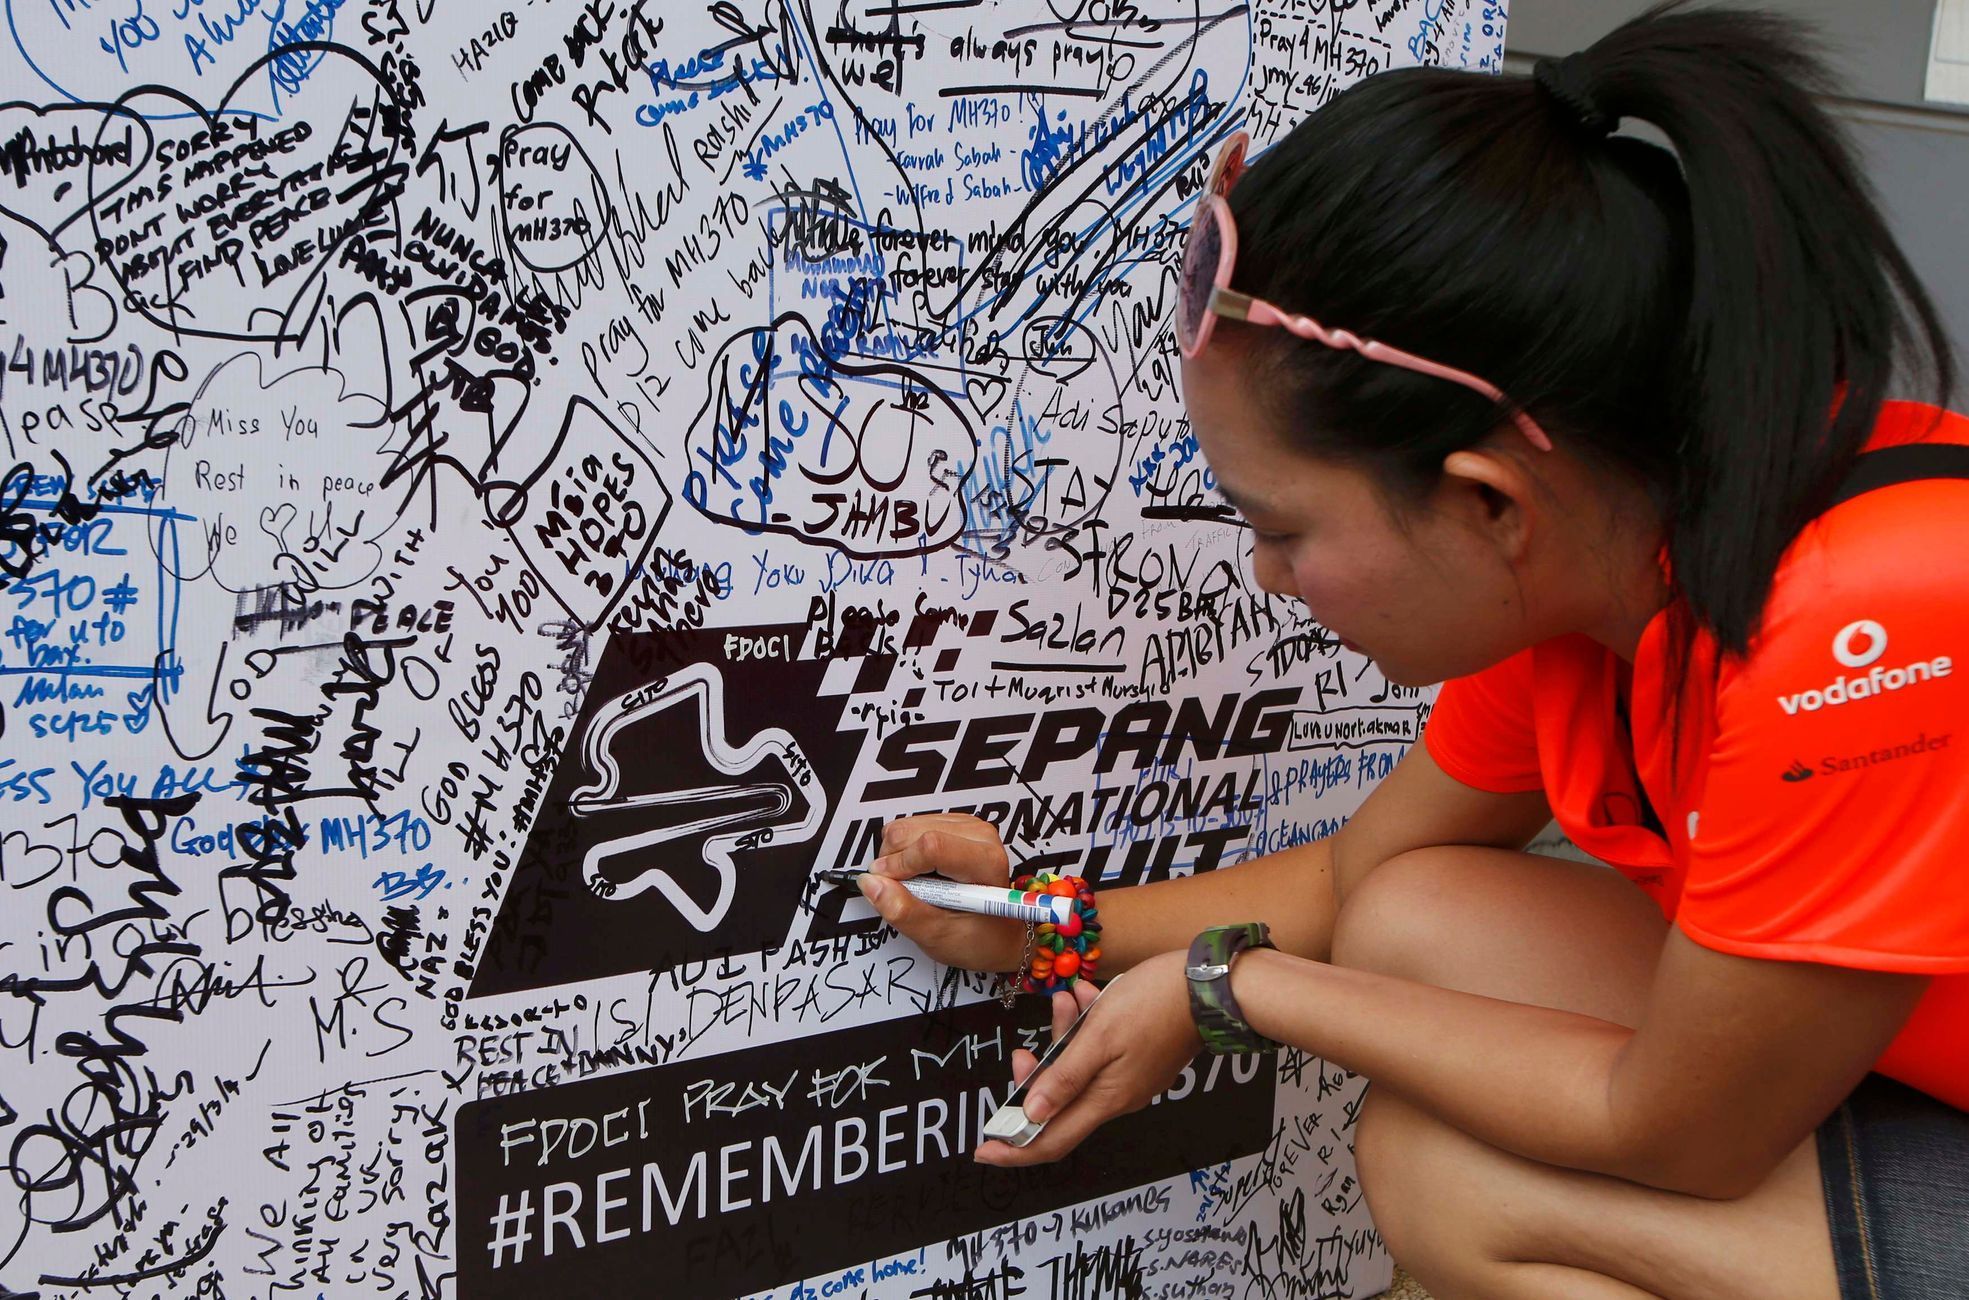 A woman writes on a wall dedicated to the passengers of the missing Malaysia Airlines flight MH370 before the Malaysian F1 Grand Prix at Sepang International Circuit outside Kuala Lumpur